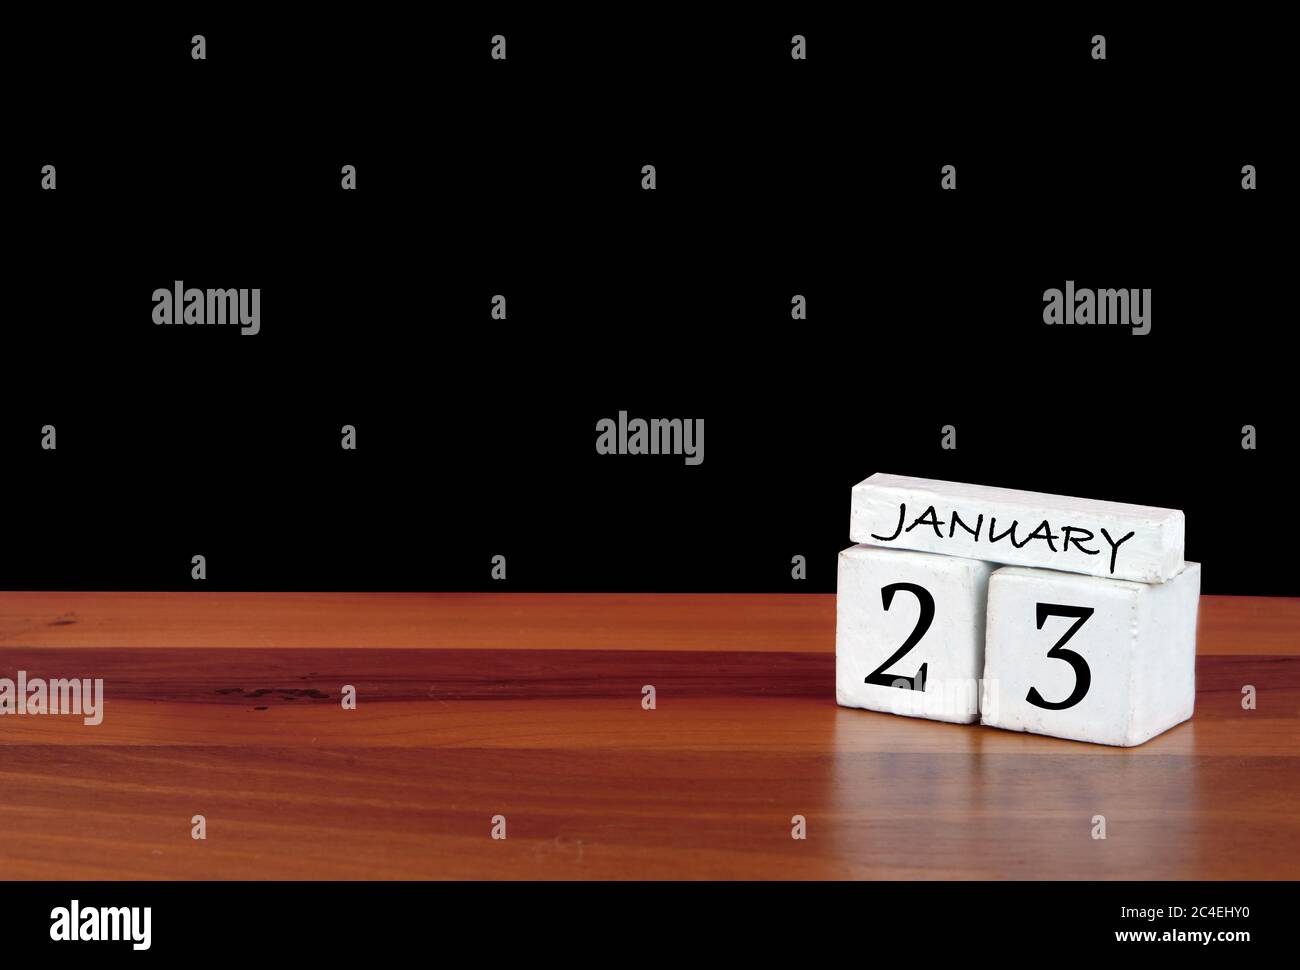 23 January calendar month. 23 days of the month. Reflected calendar on wooden floor with black background Stock Photo